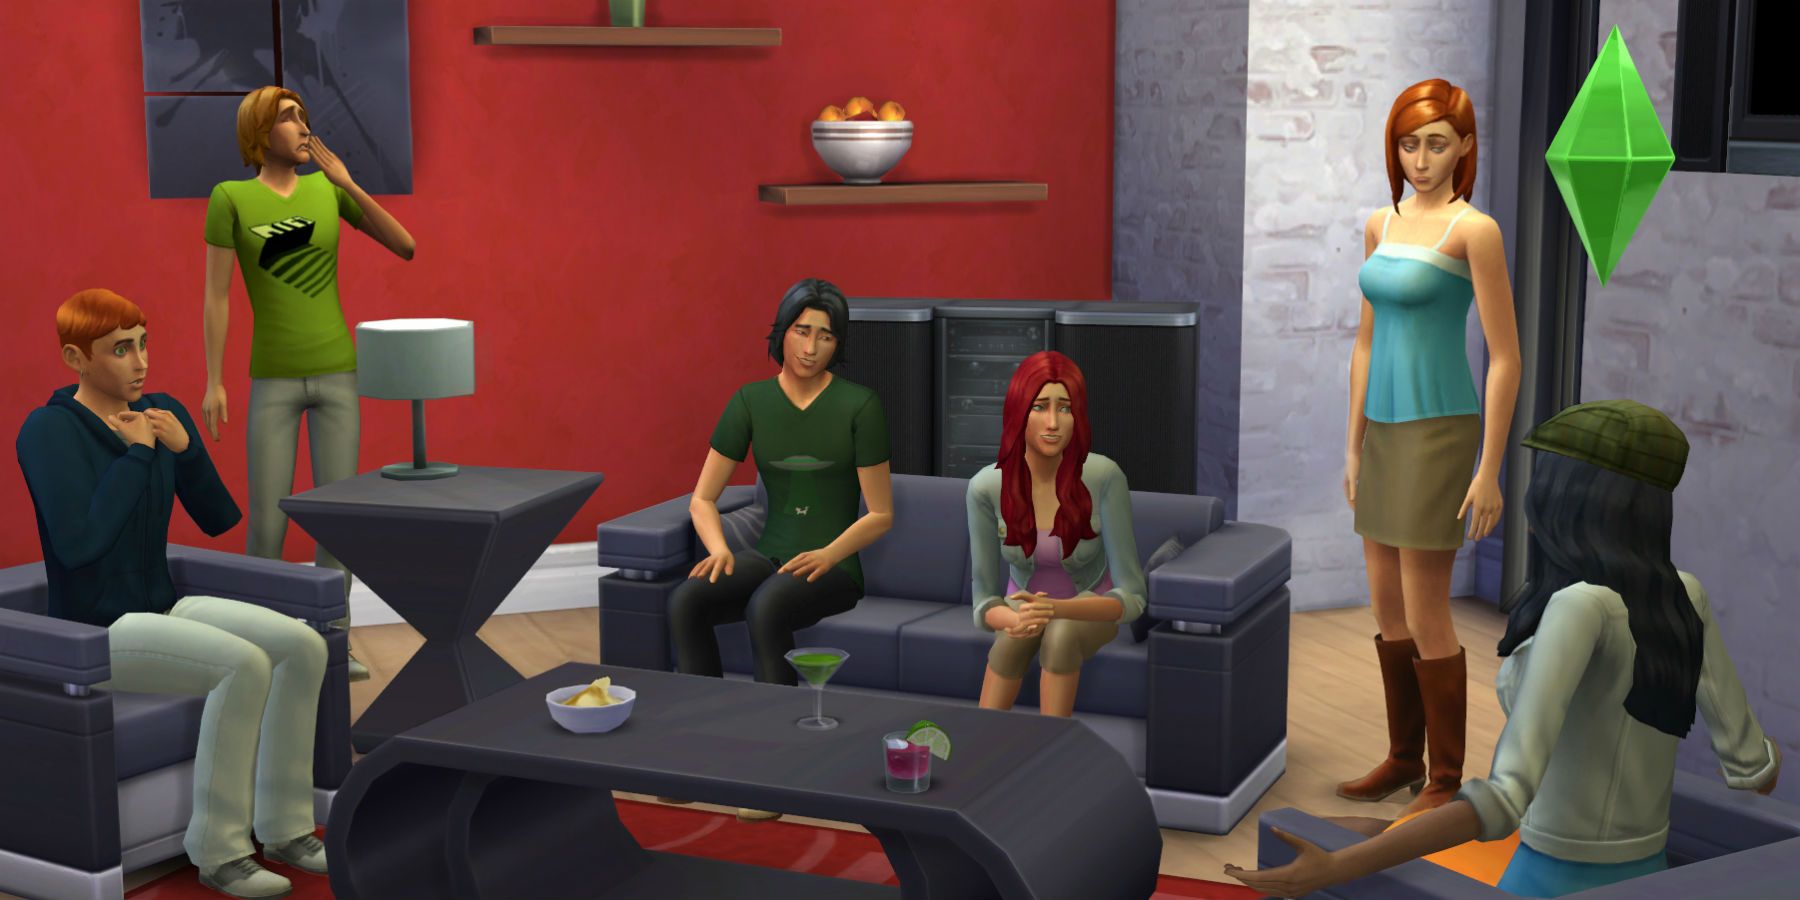 The Sims 5 Could Have Online Social Features Inspired By Sims Online